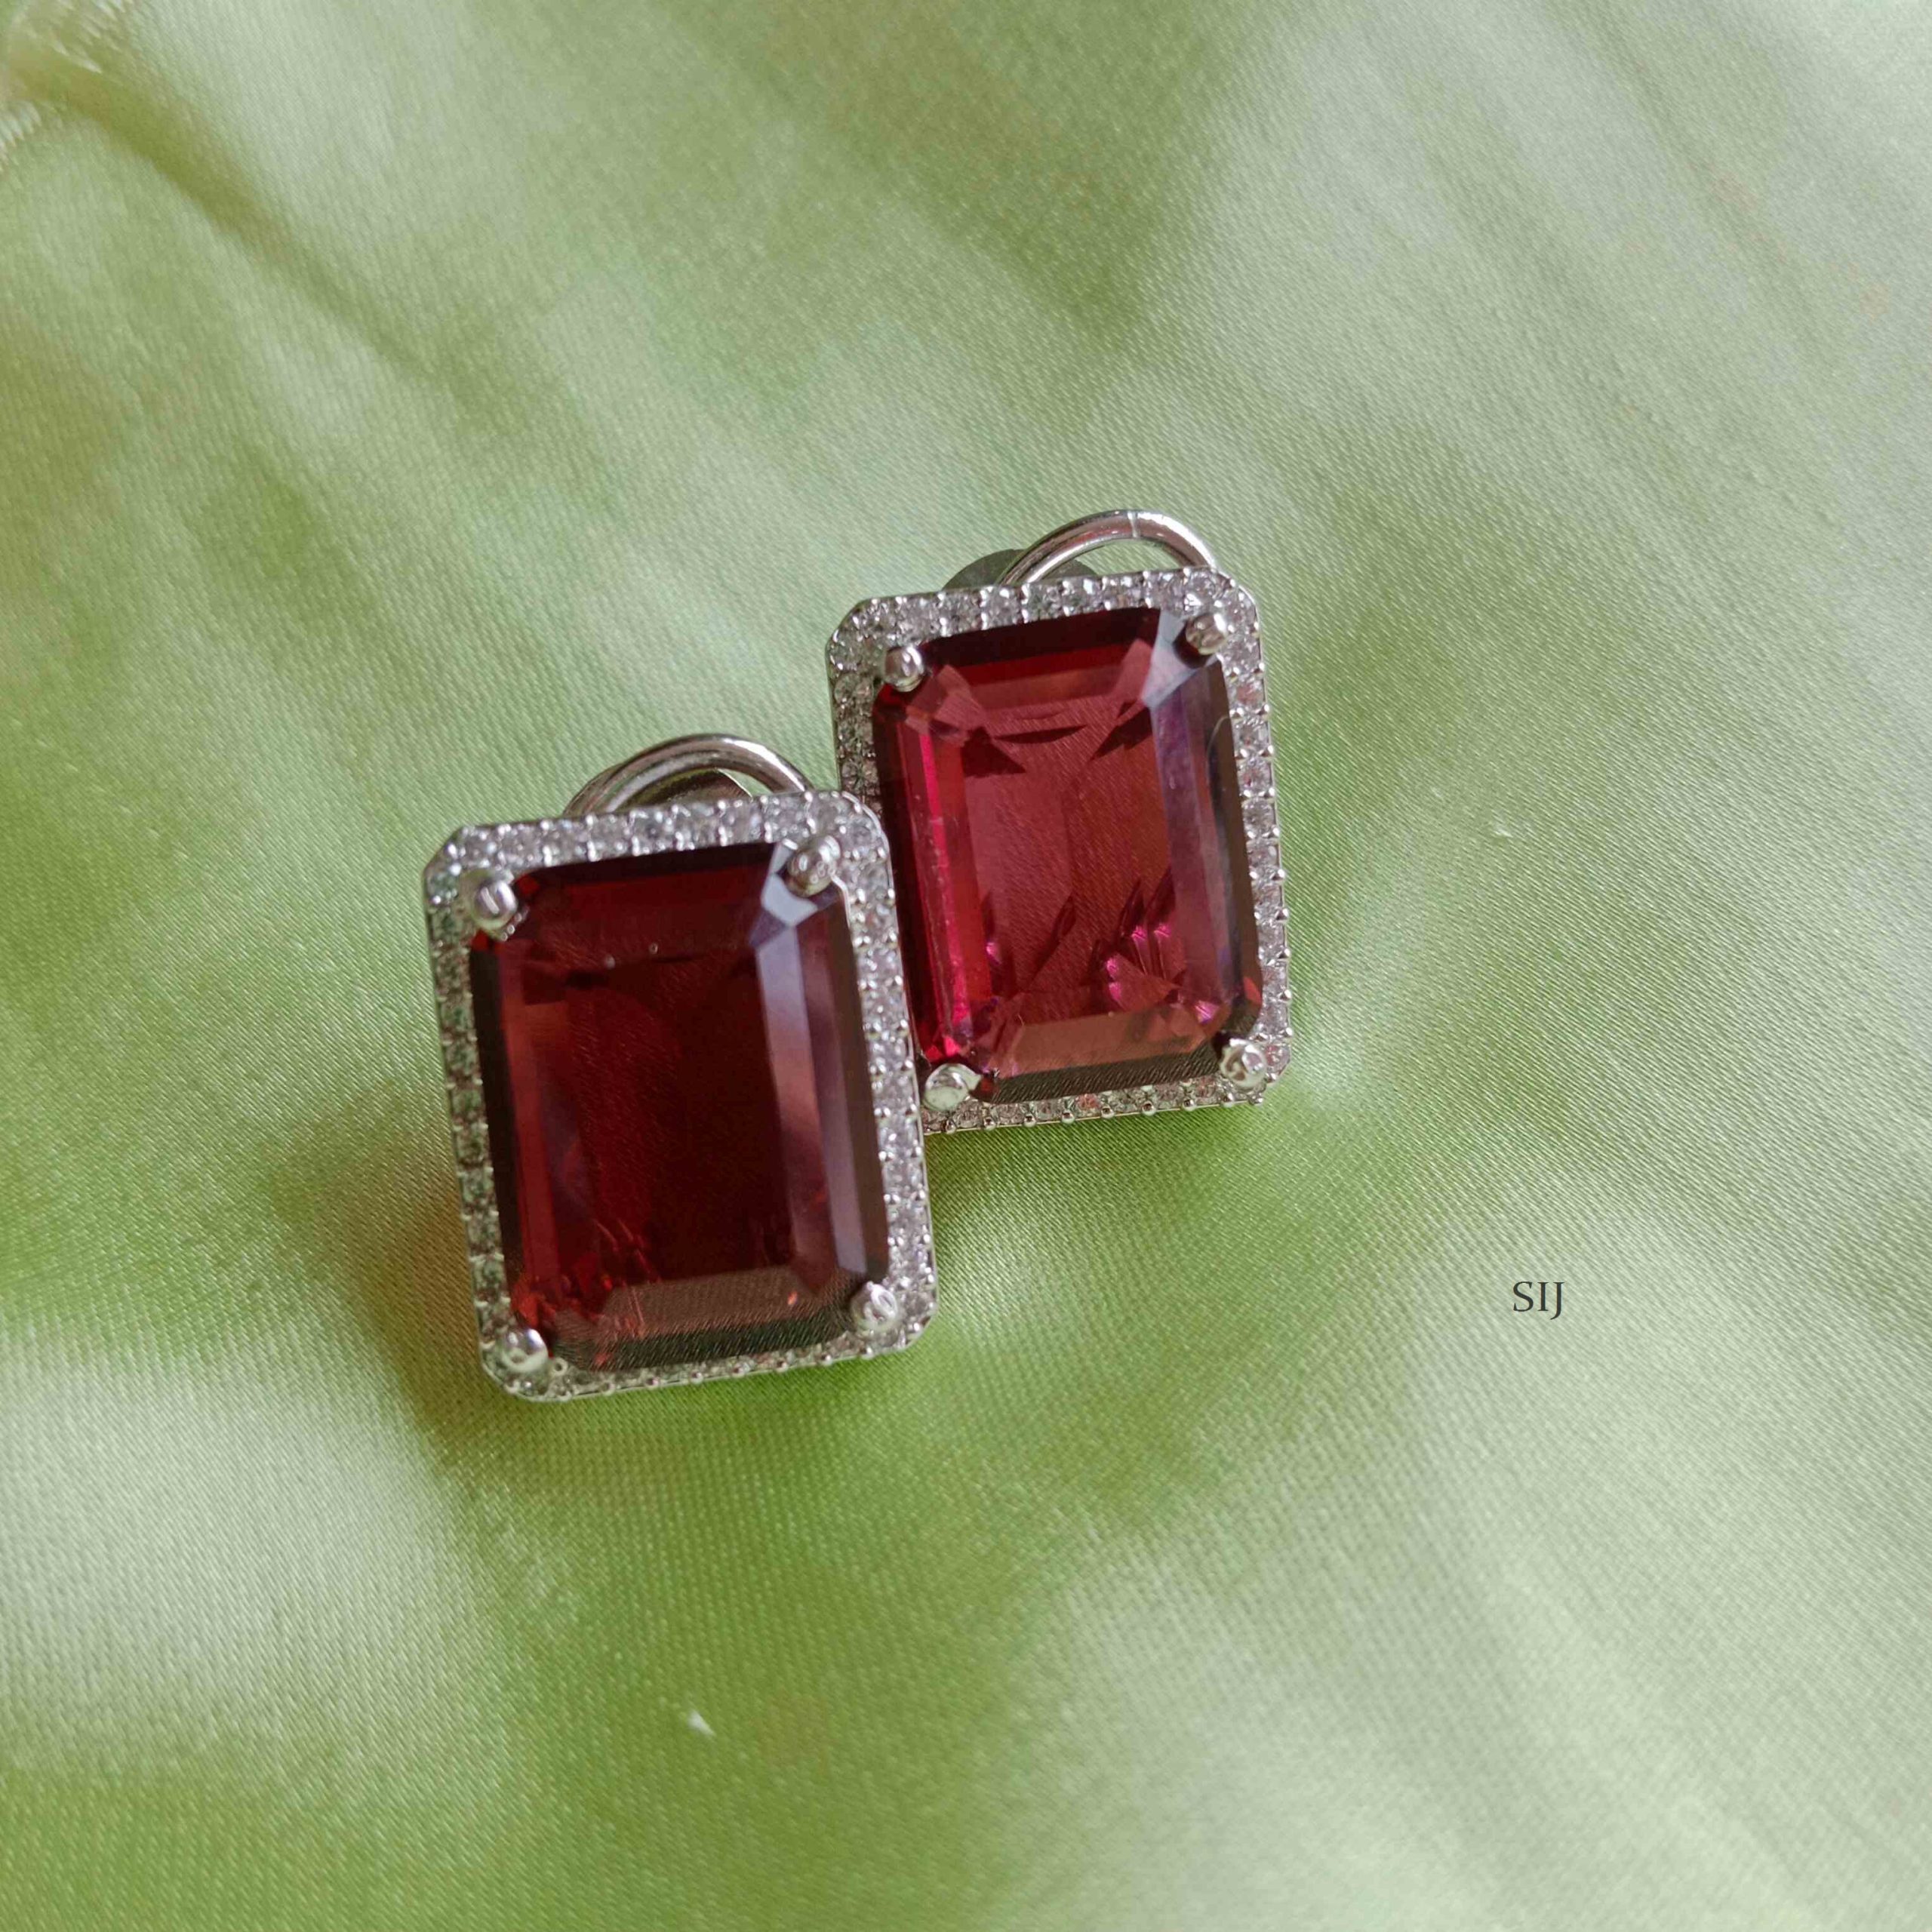 Imitation Ruby And AD Stones Studs